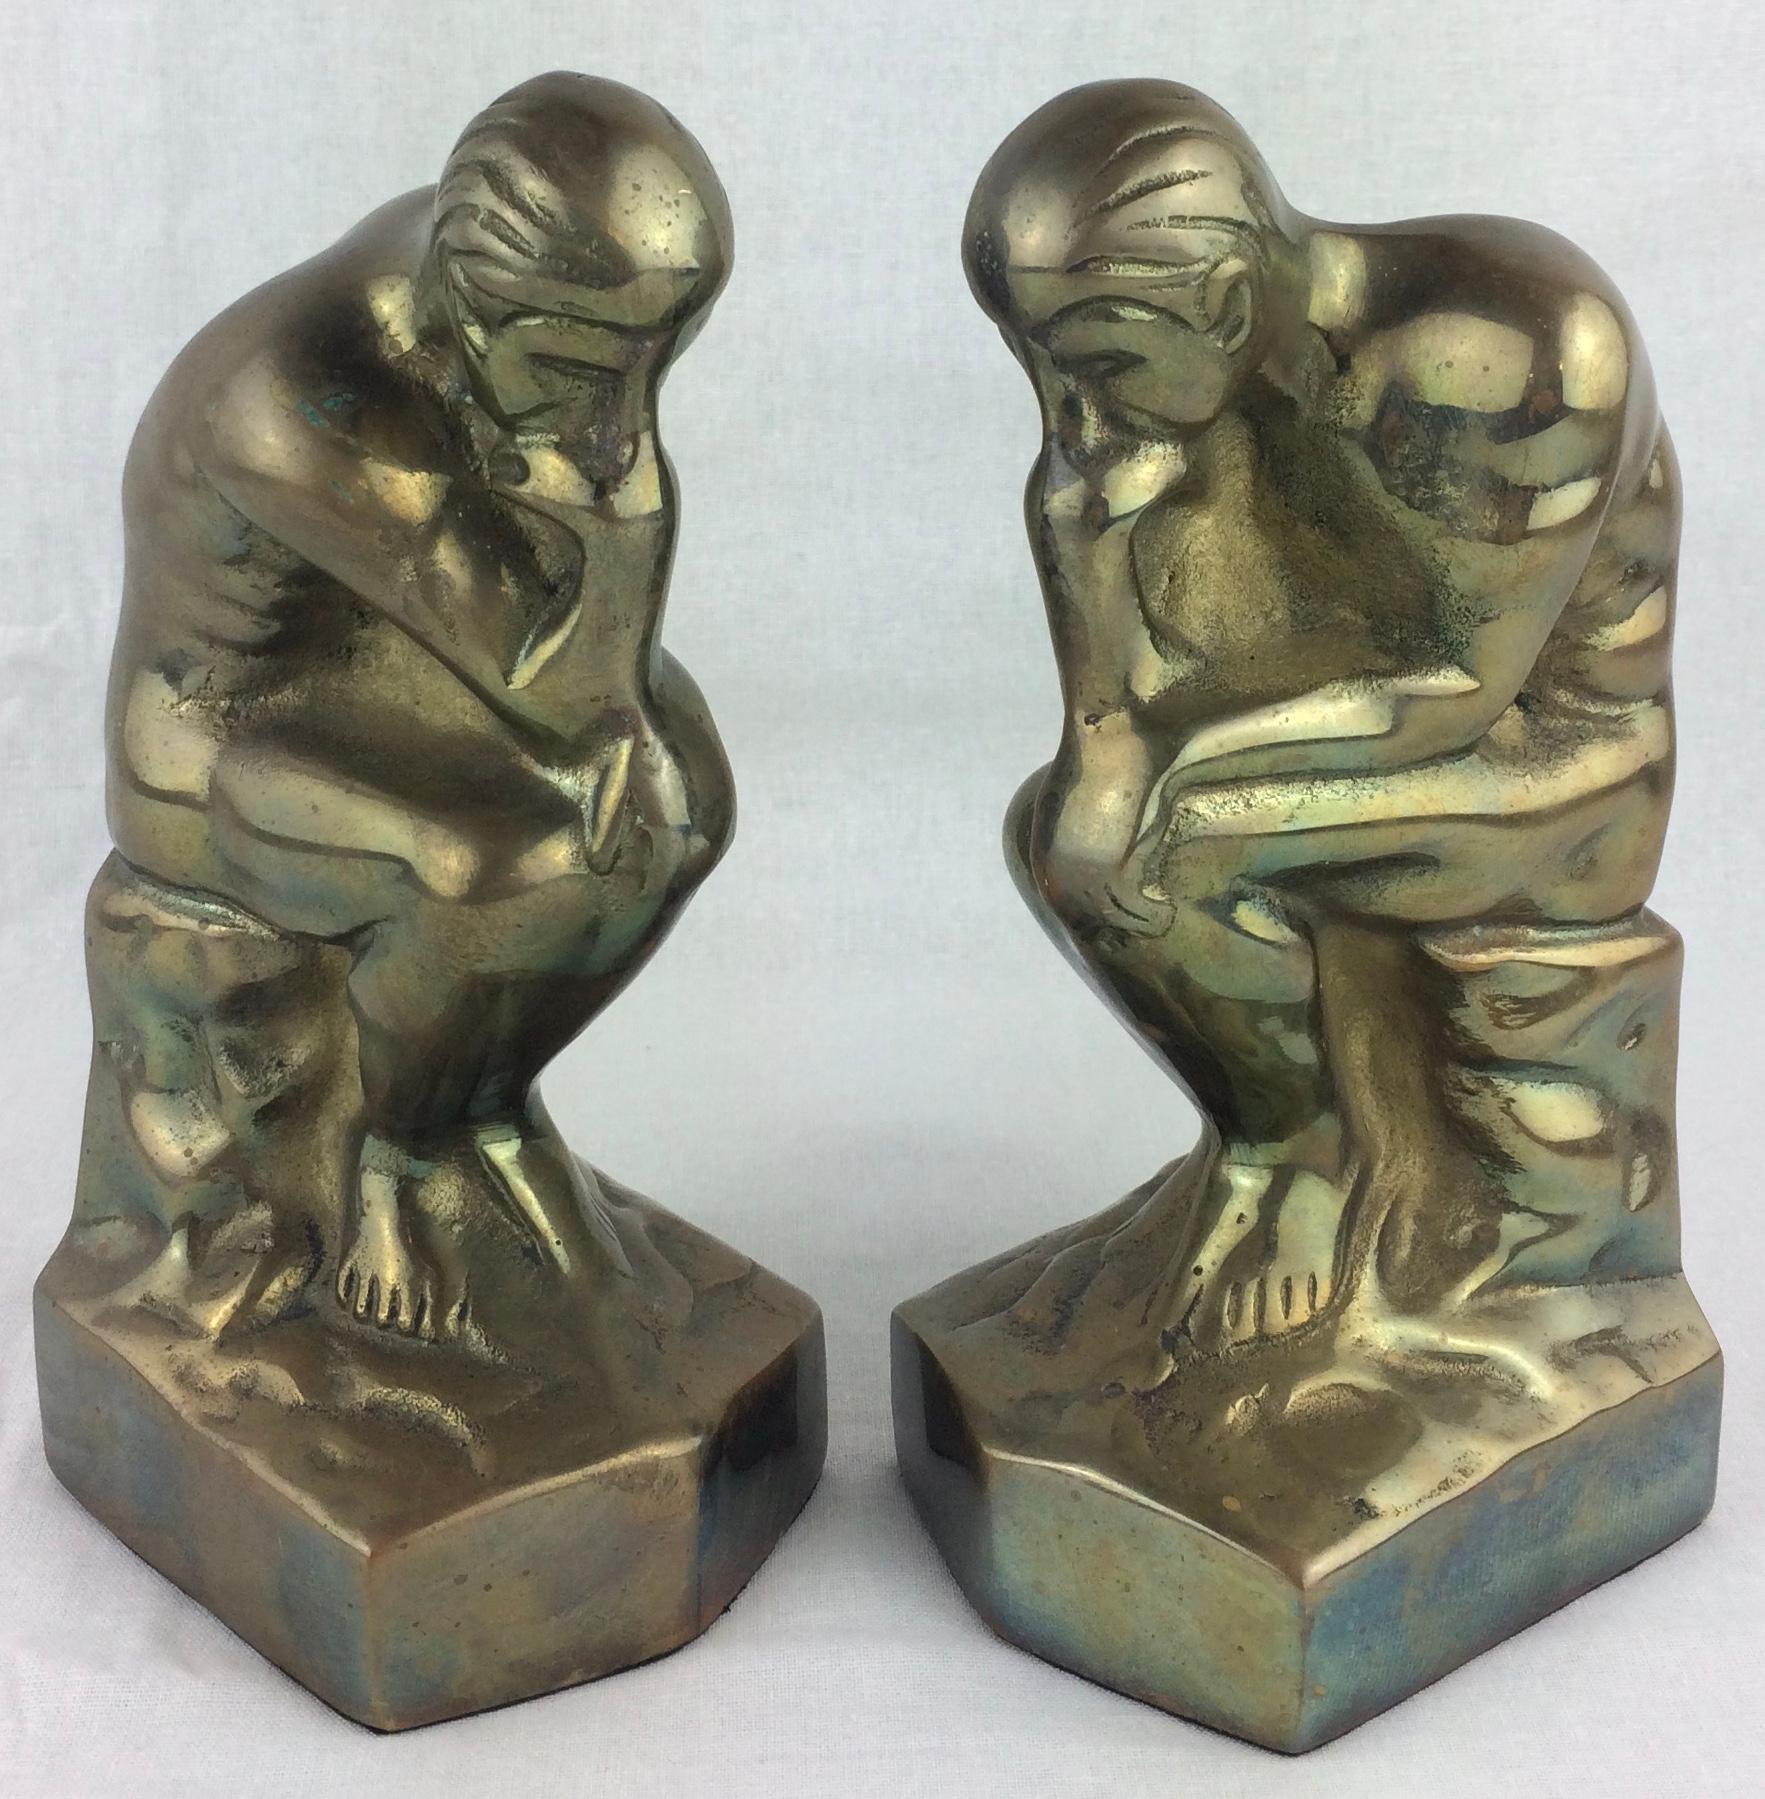 A fine quality pair of French sculptural bookends of muscular male nudes.  
Additional photos provided upon request.

These handcrafted bookends are particularly interesting, sculpted after a magnificent statue titled 